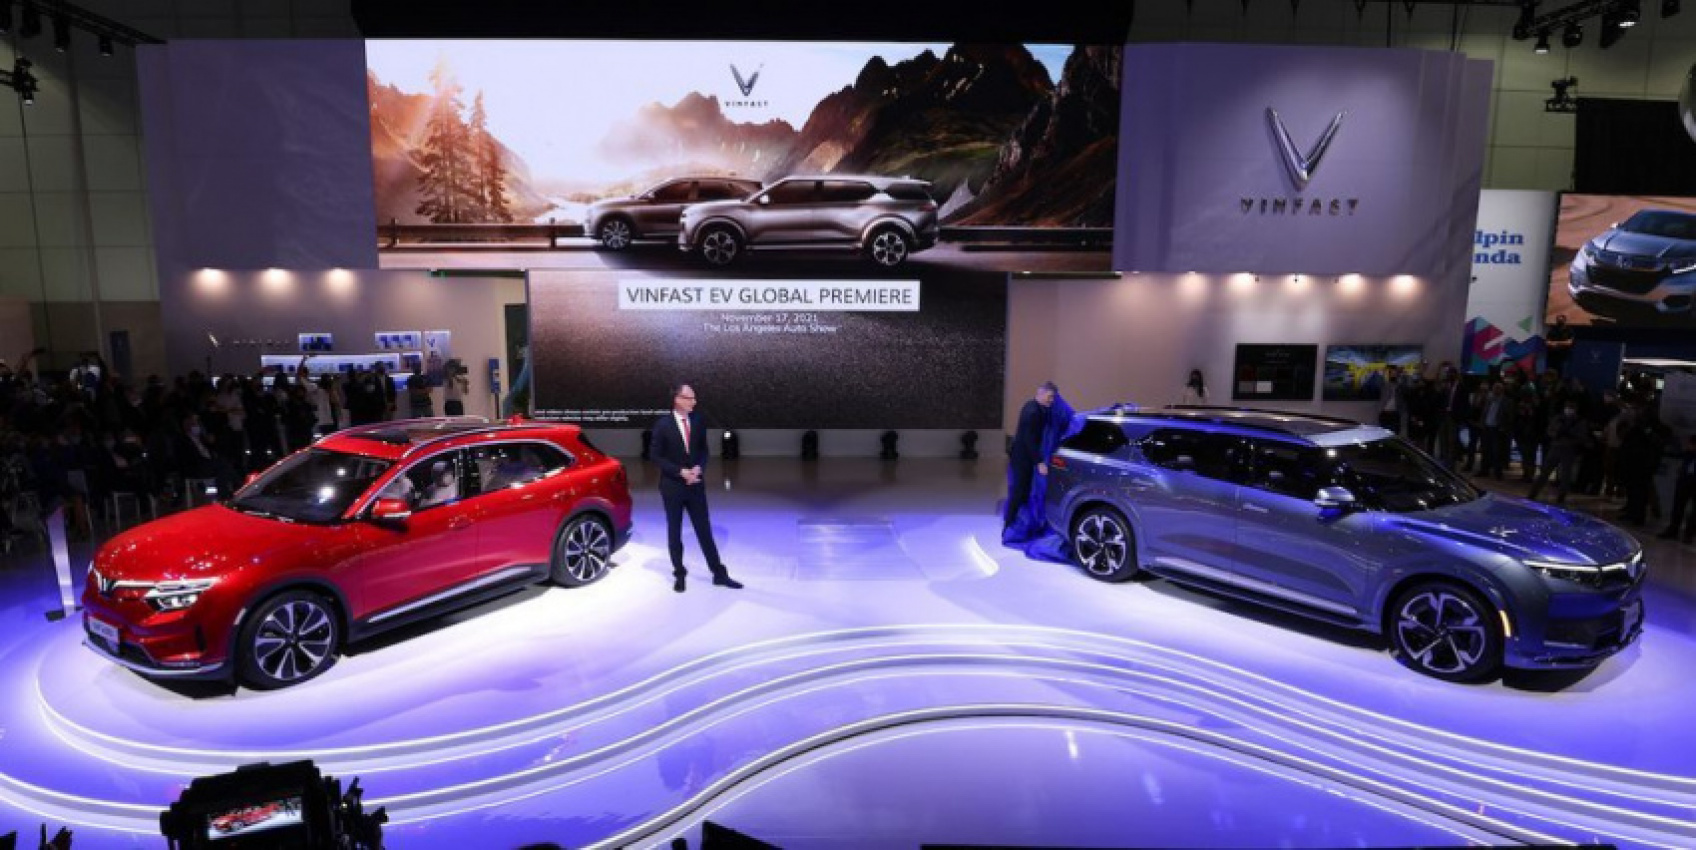 autos, cars, vinfast, auto news, ces, consumer electronics show, electric, ev, launch, north america, vf5, vf6, vf7, vinfast wows ces crowd with 3 new evs - vf5, vf6, vf7 on stage